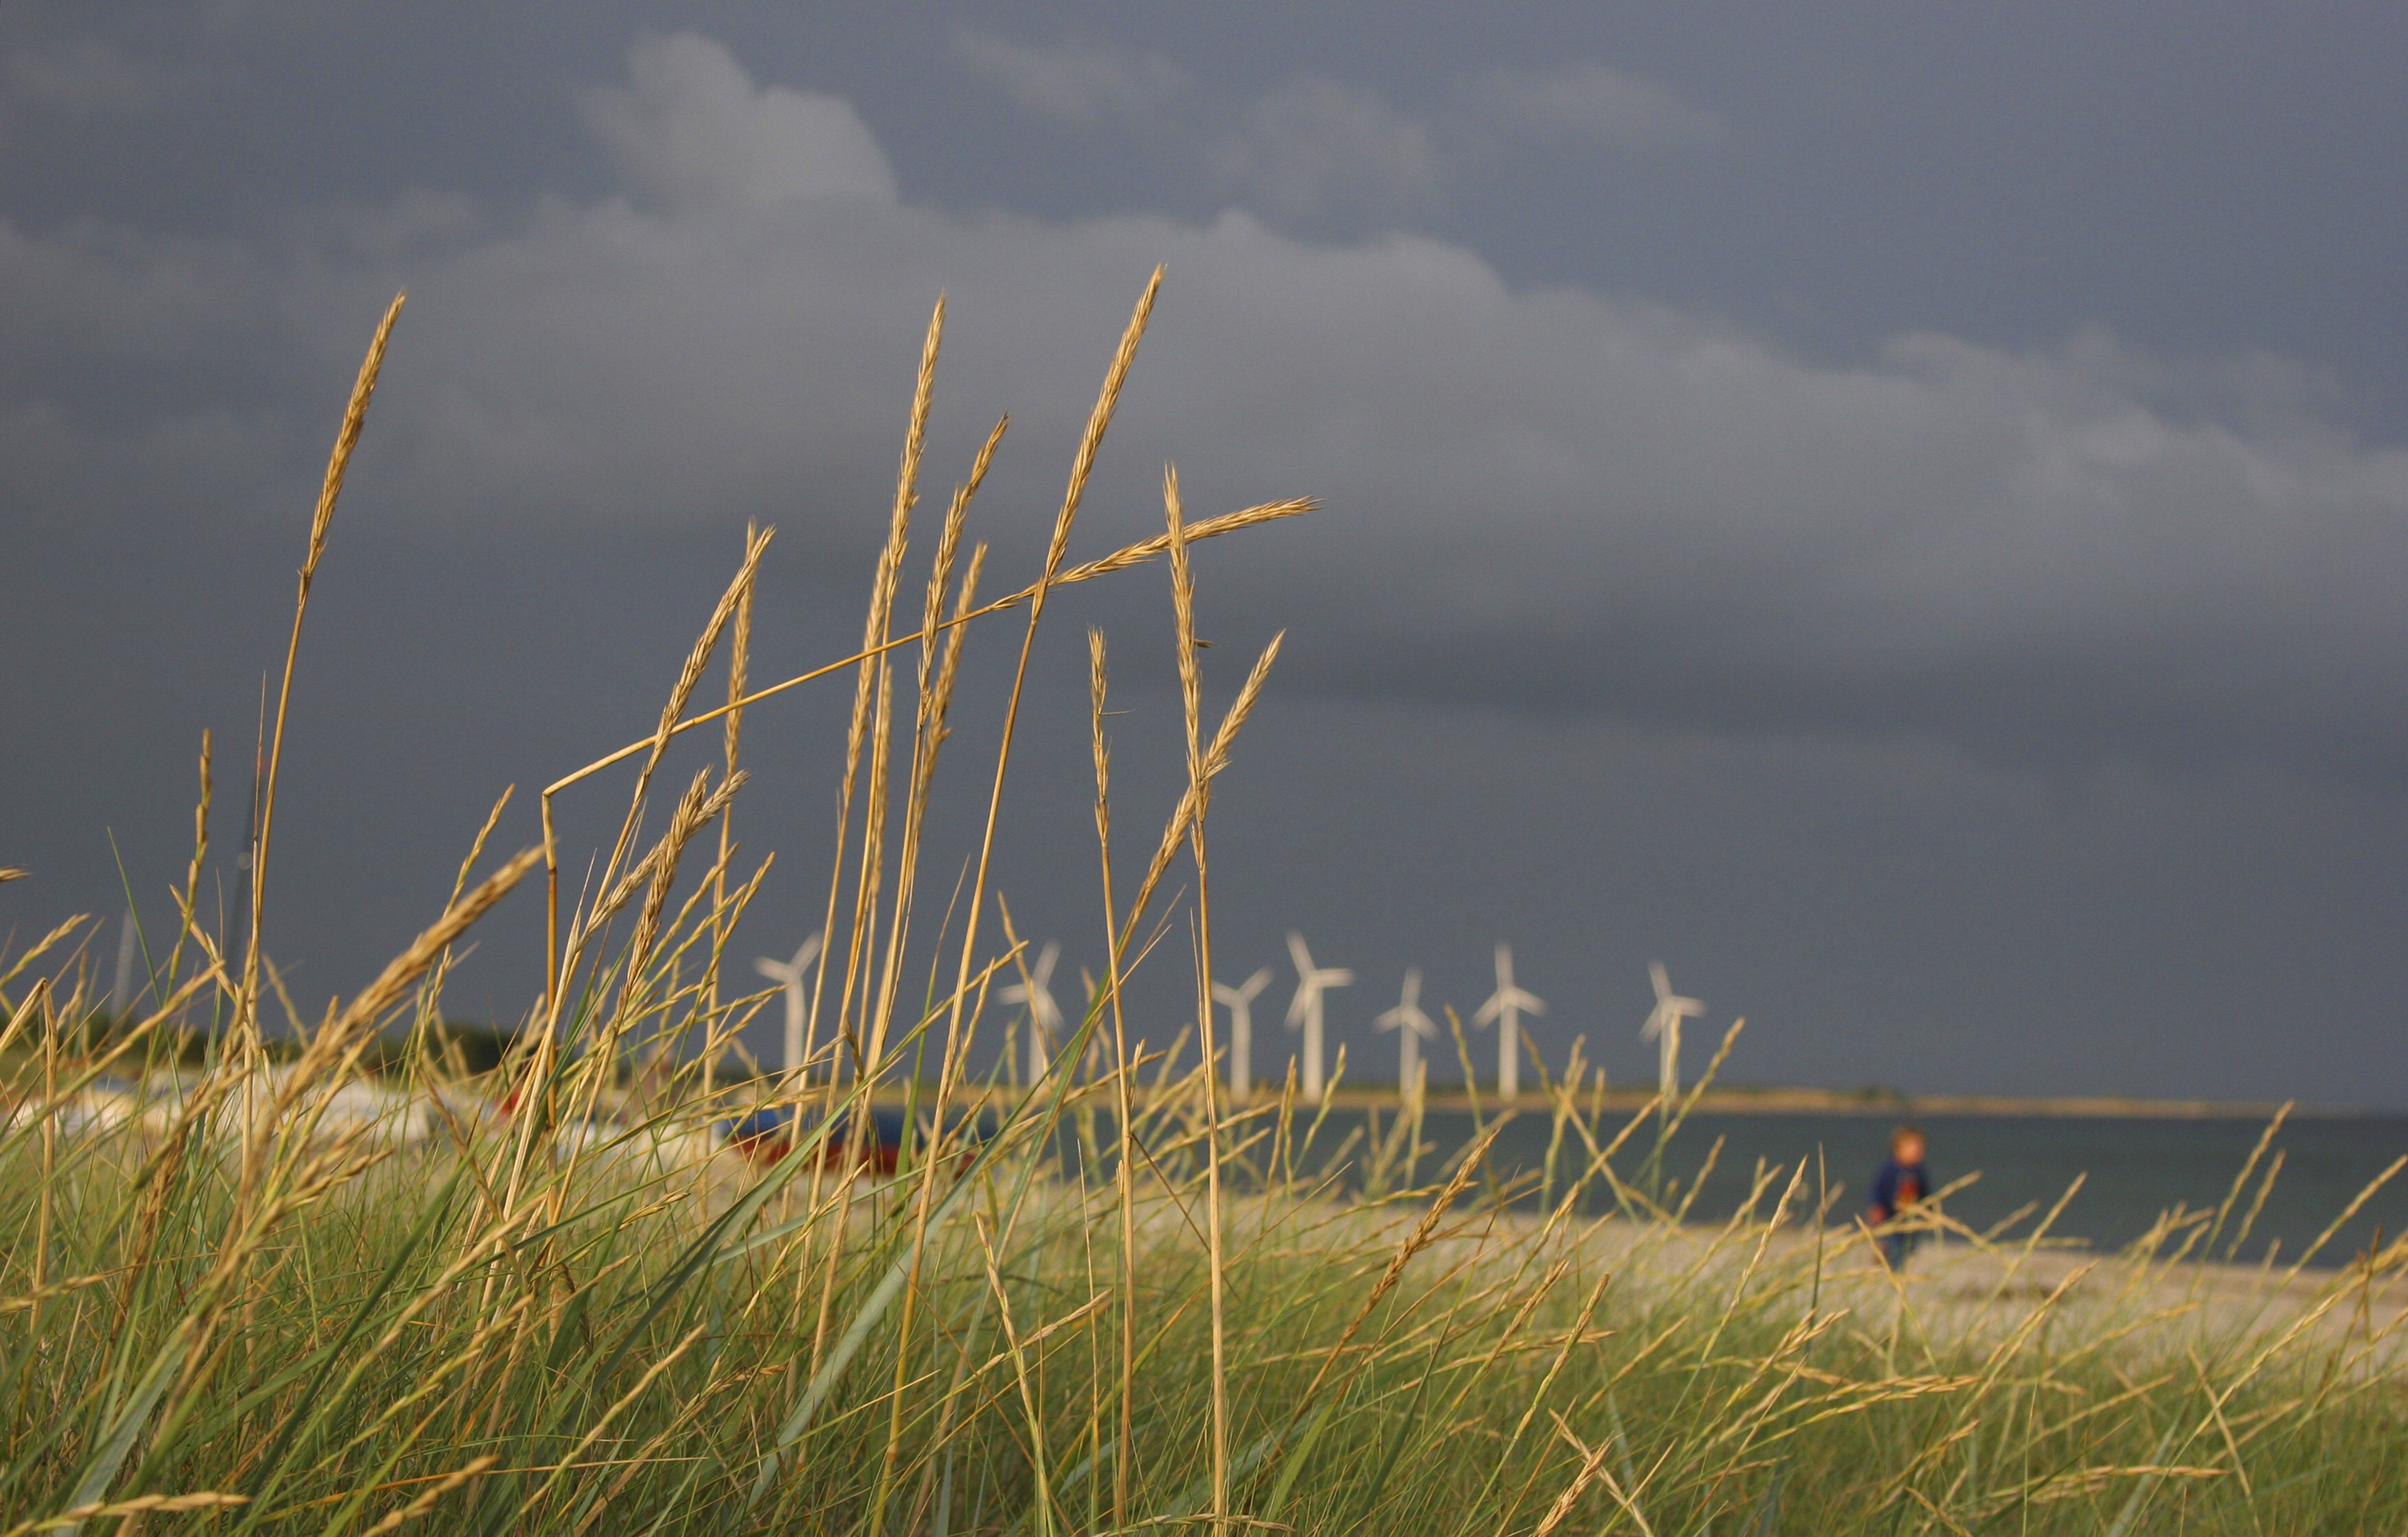 Denmark gets about one third of its electric power from windfarms: off-shore windmills.